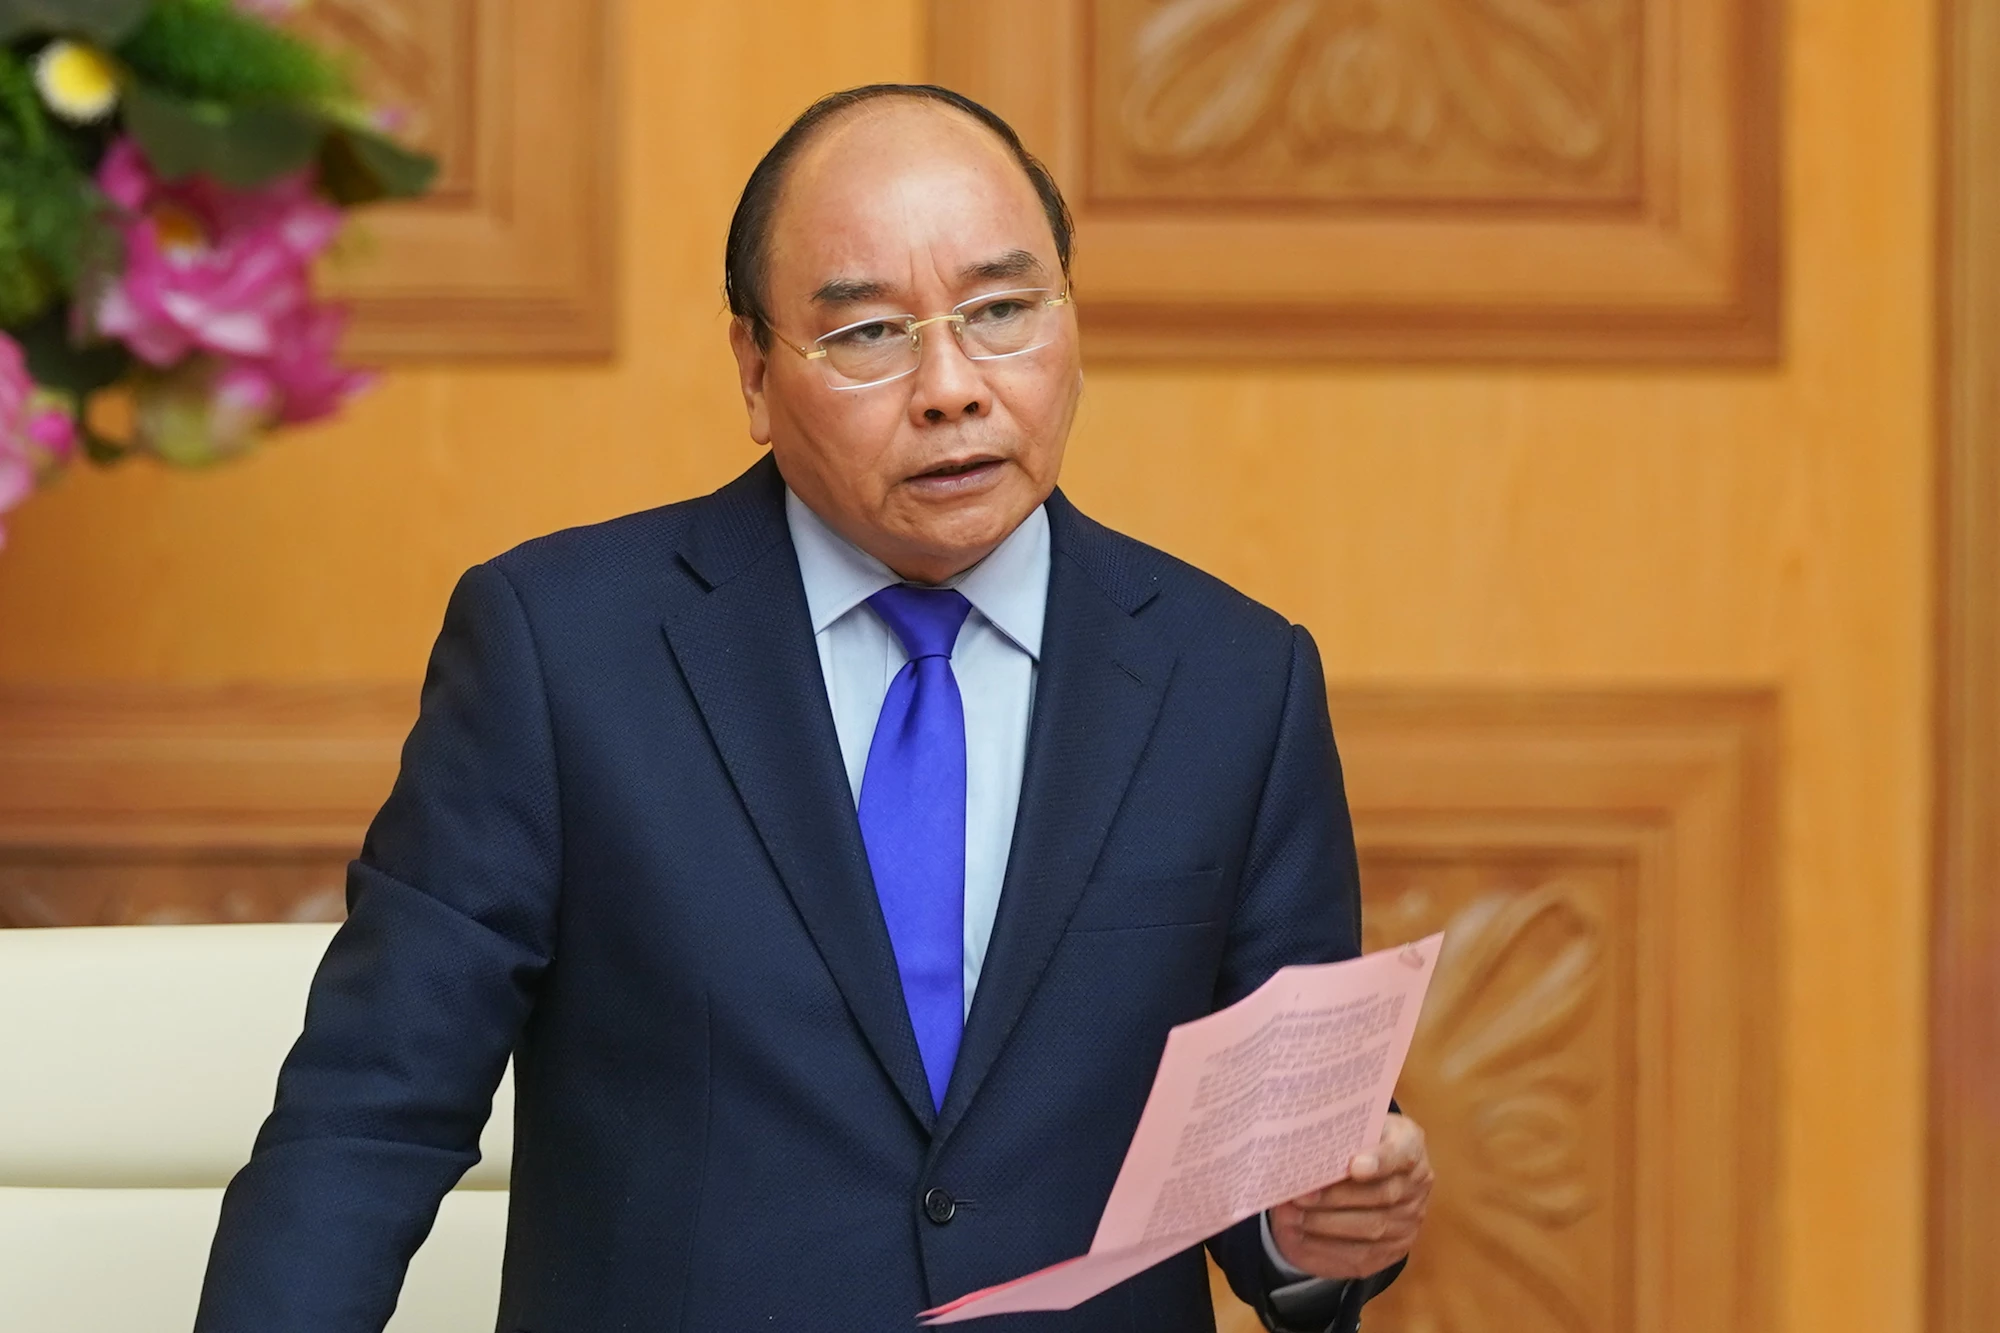 Prime Minister Nguyen Xuan Phuc instructed to strengthen Corona prevention.